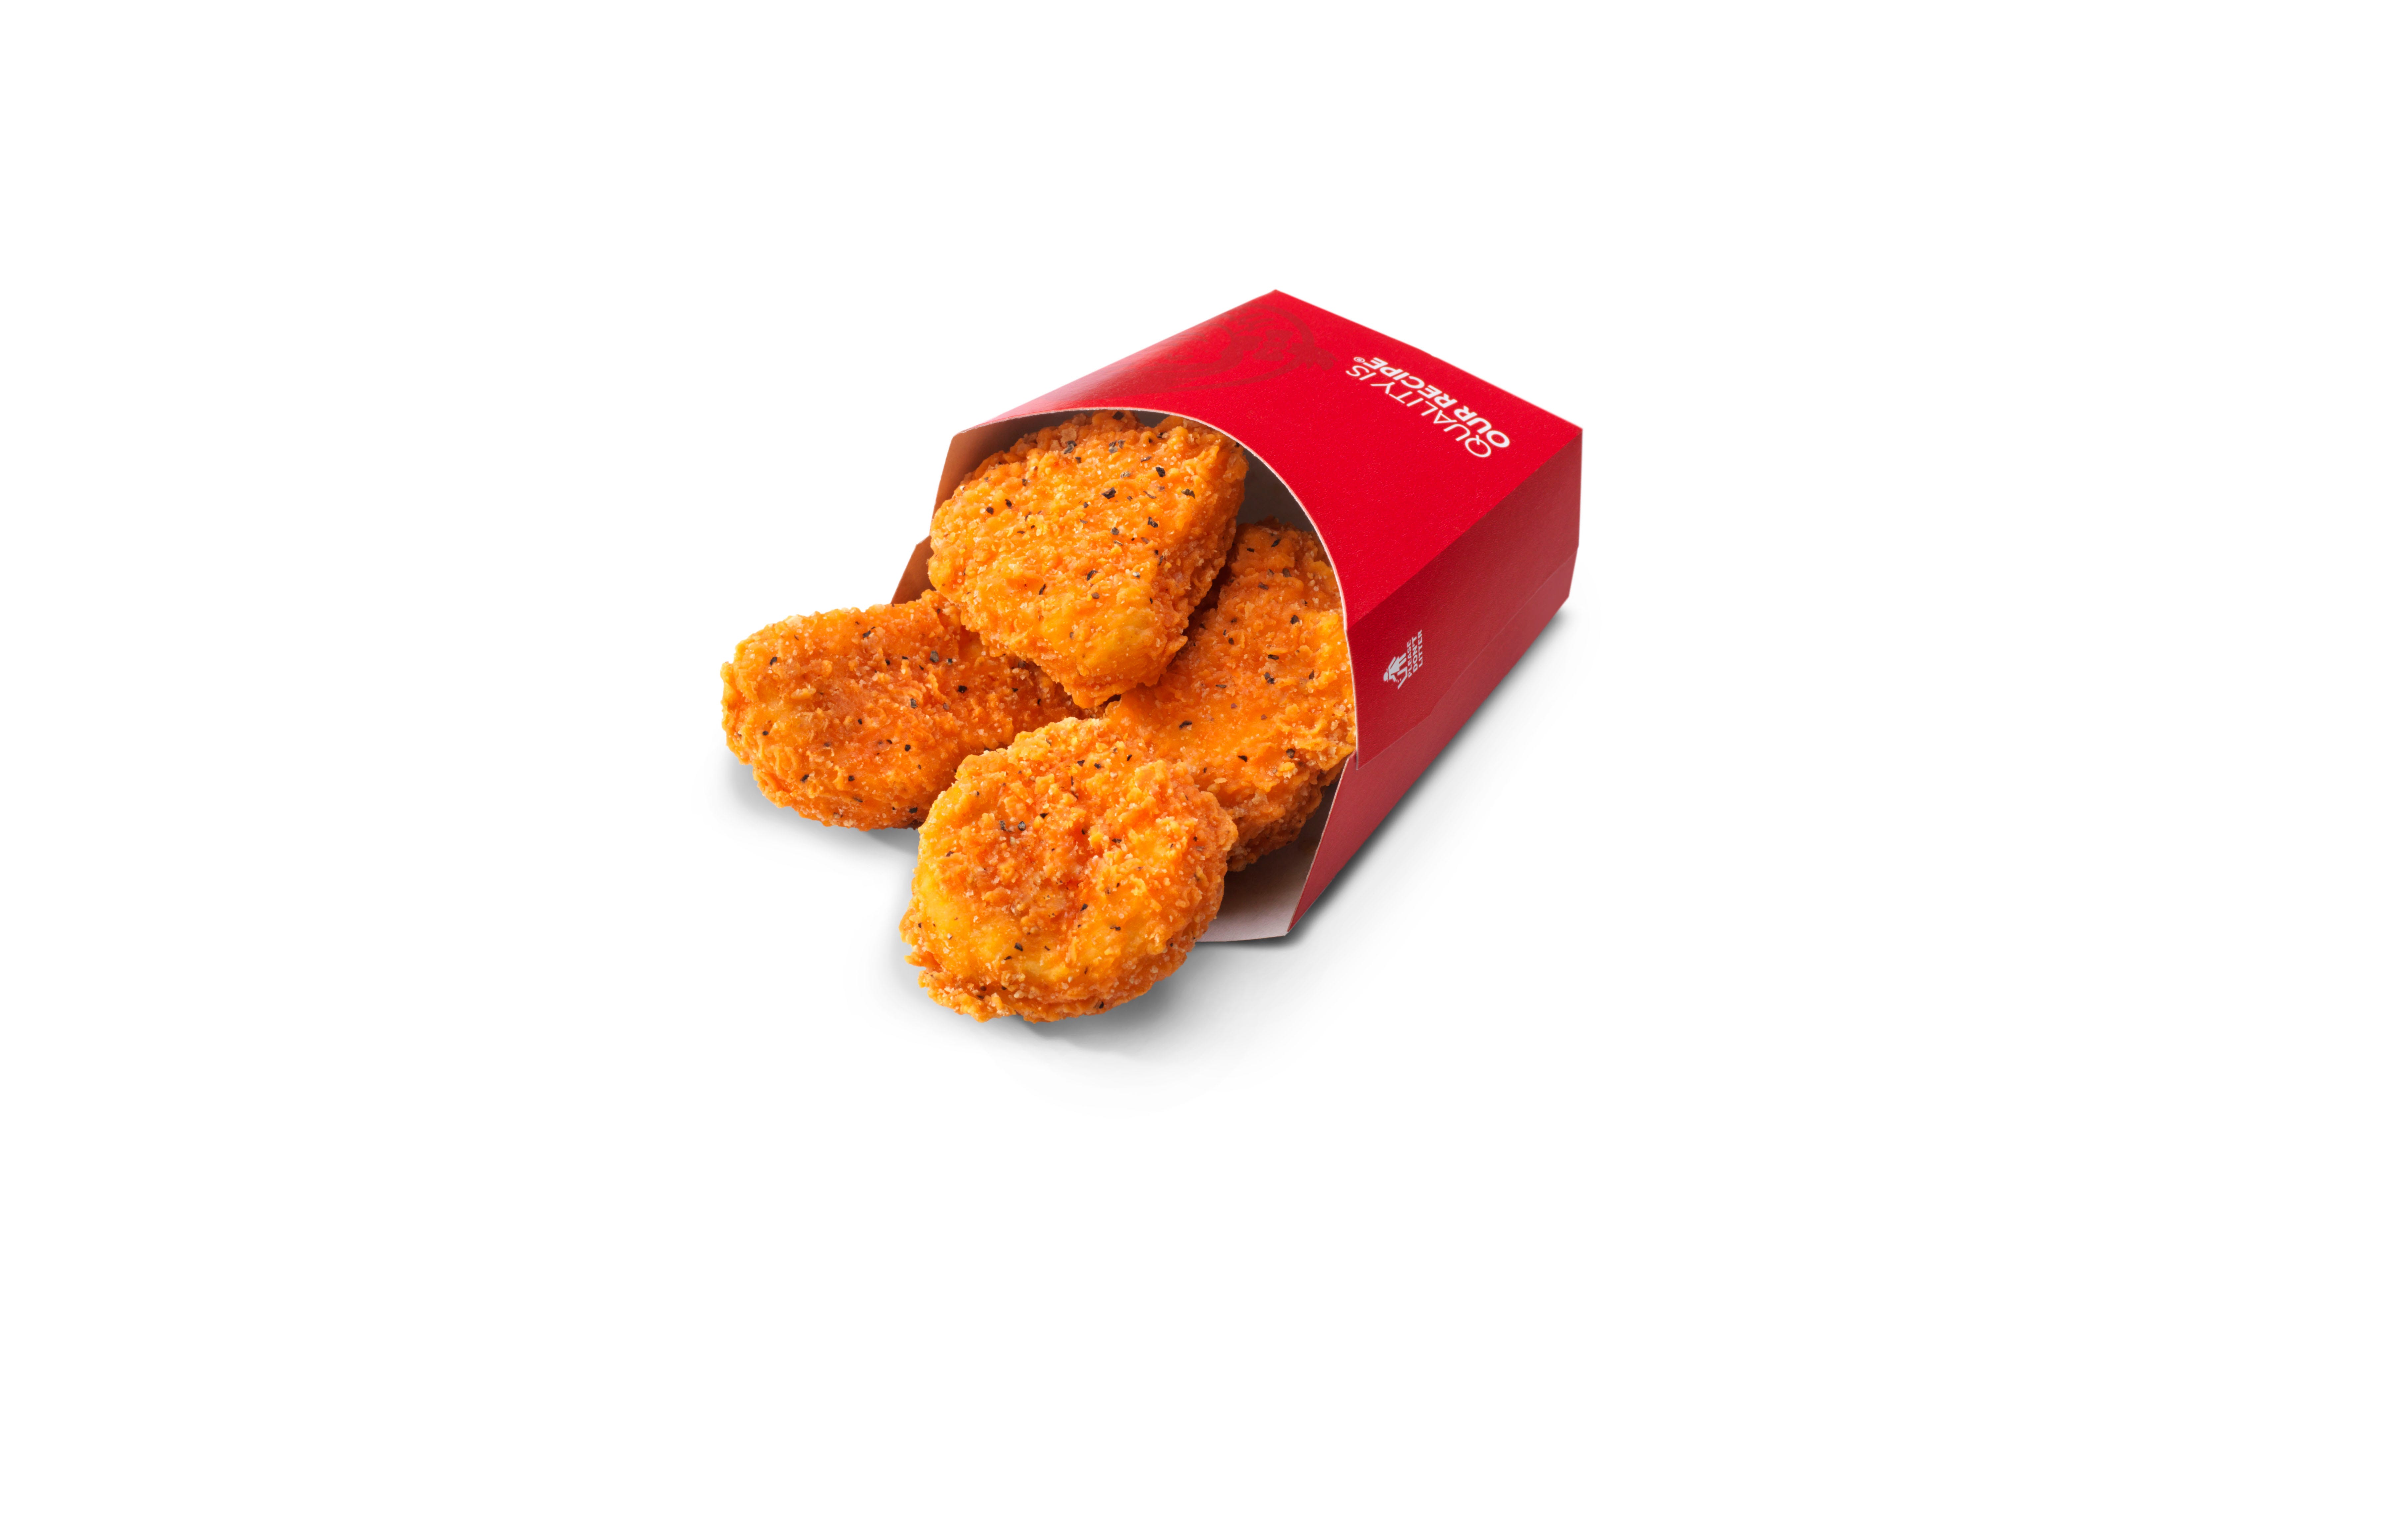 Wendy's spicy chicken nuggets are back, thanks to Chance the Rapper